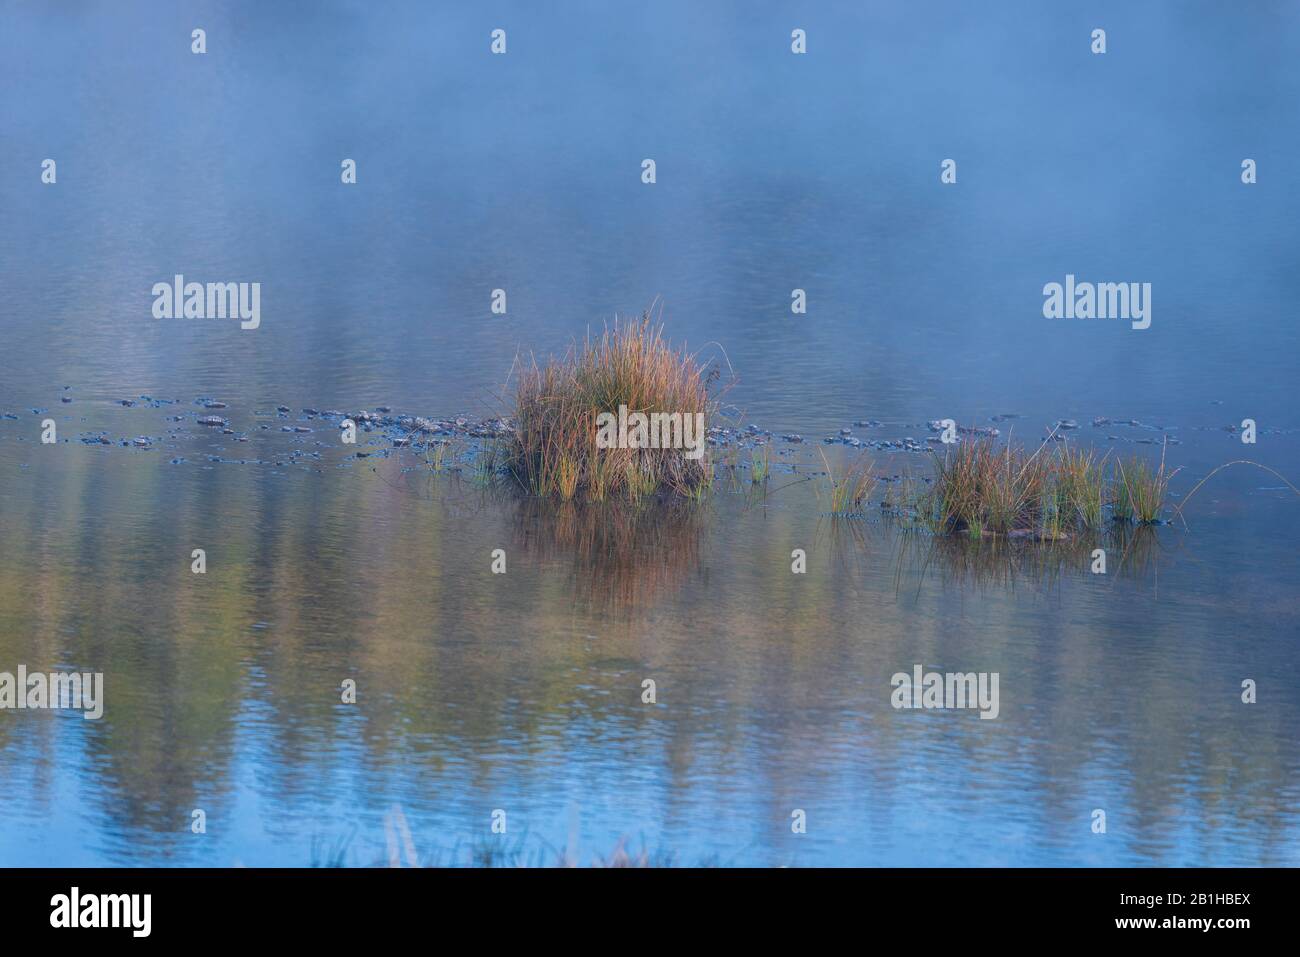 Peaceful calm water with mist and clumps of grass reflecting green trees and blue sky. Peaceful environment. Stock Photo